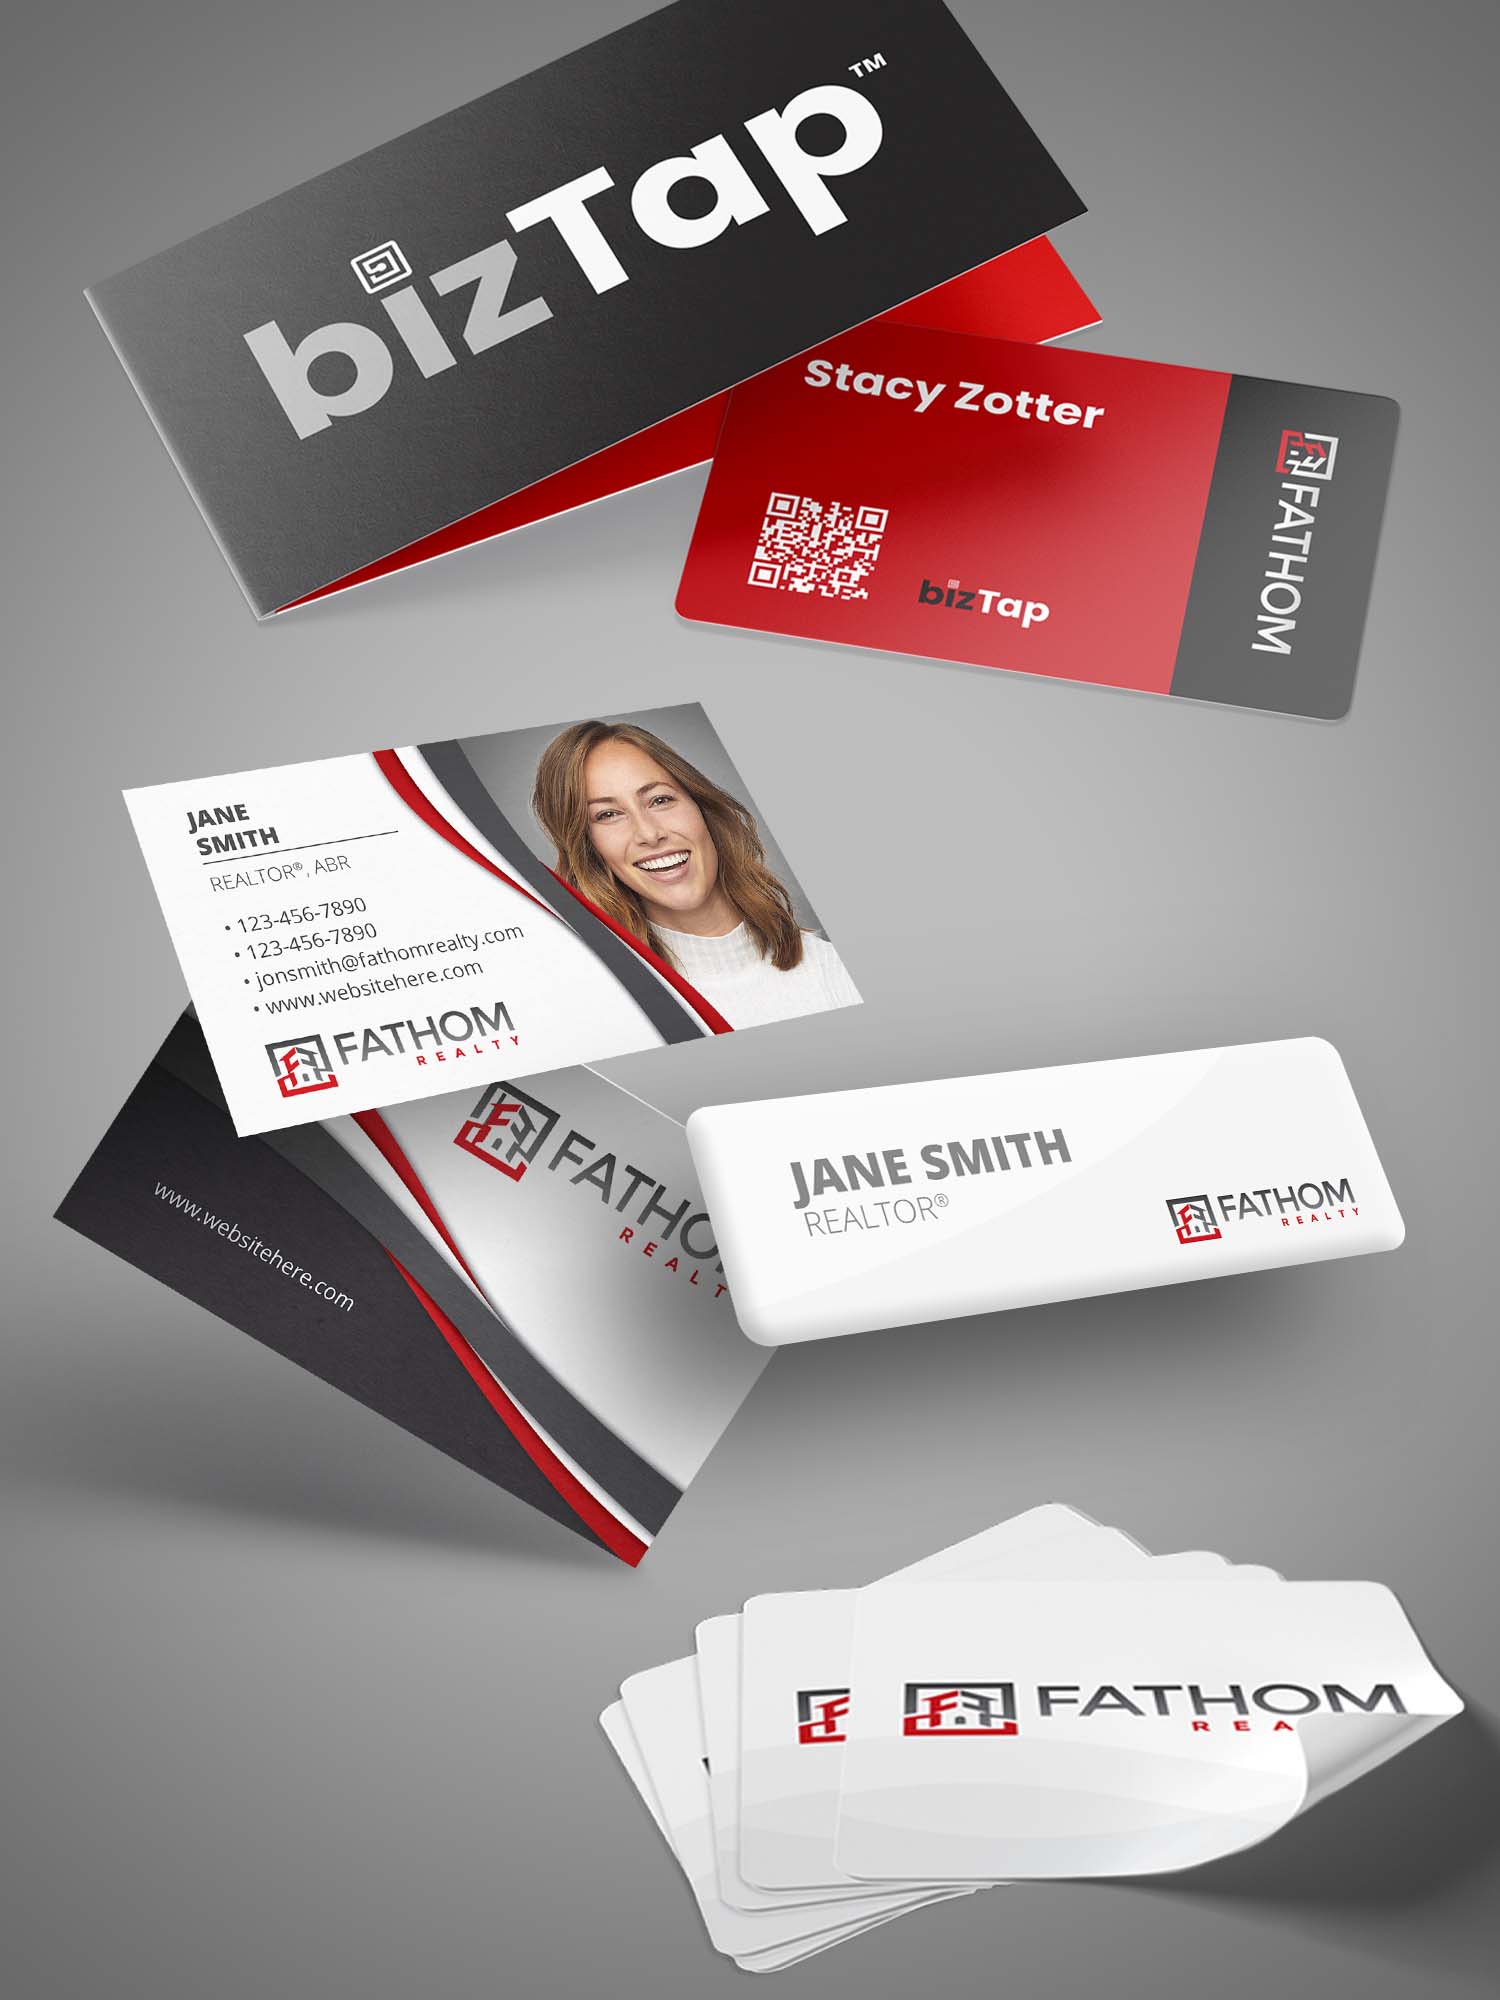 fathom realty business cards 1